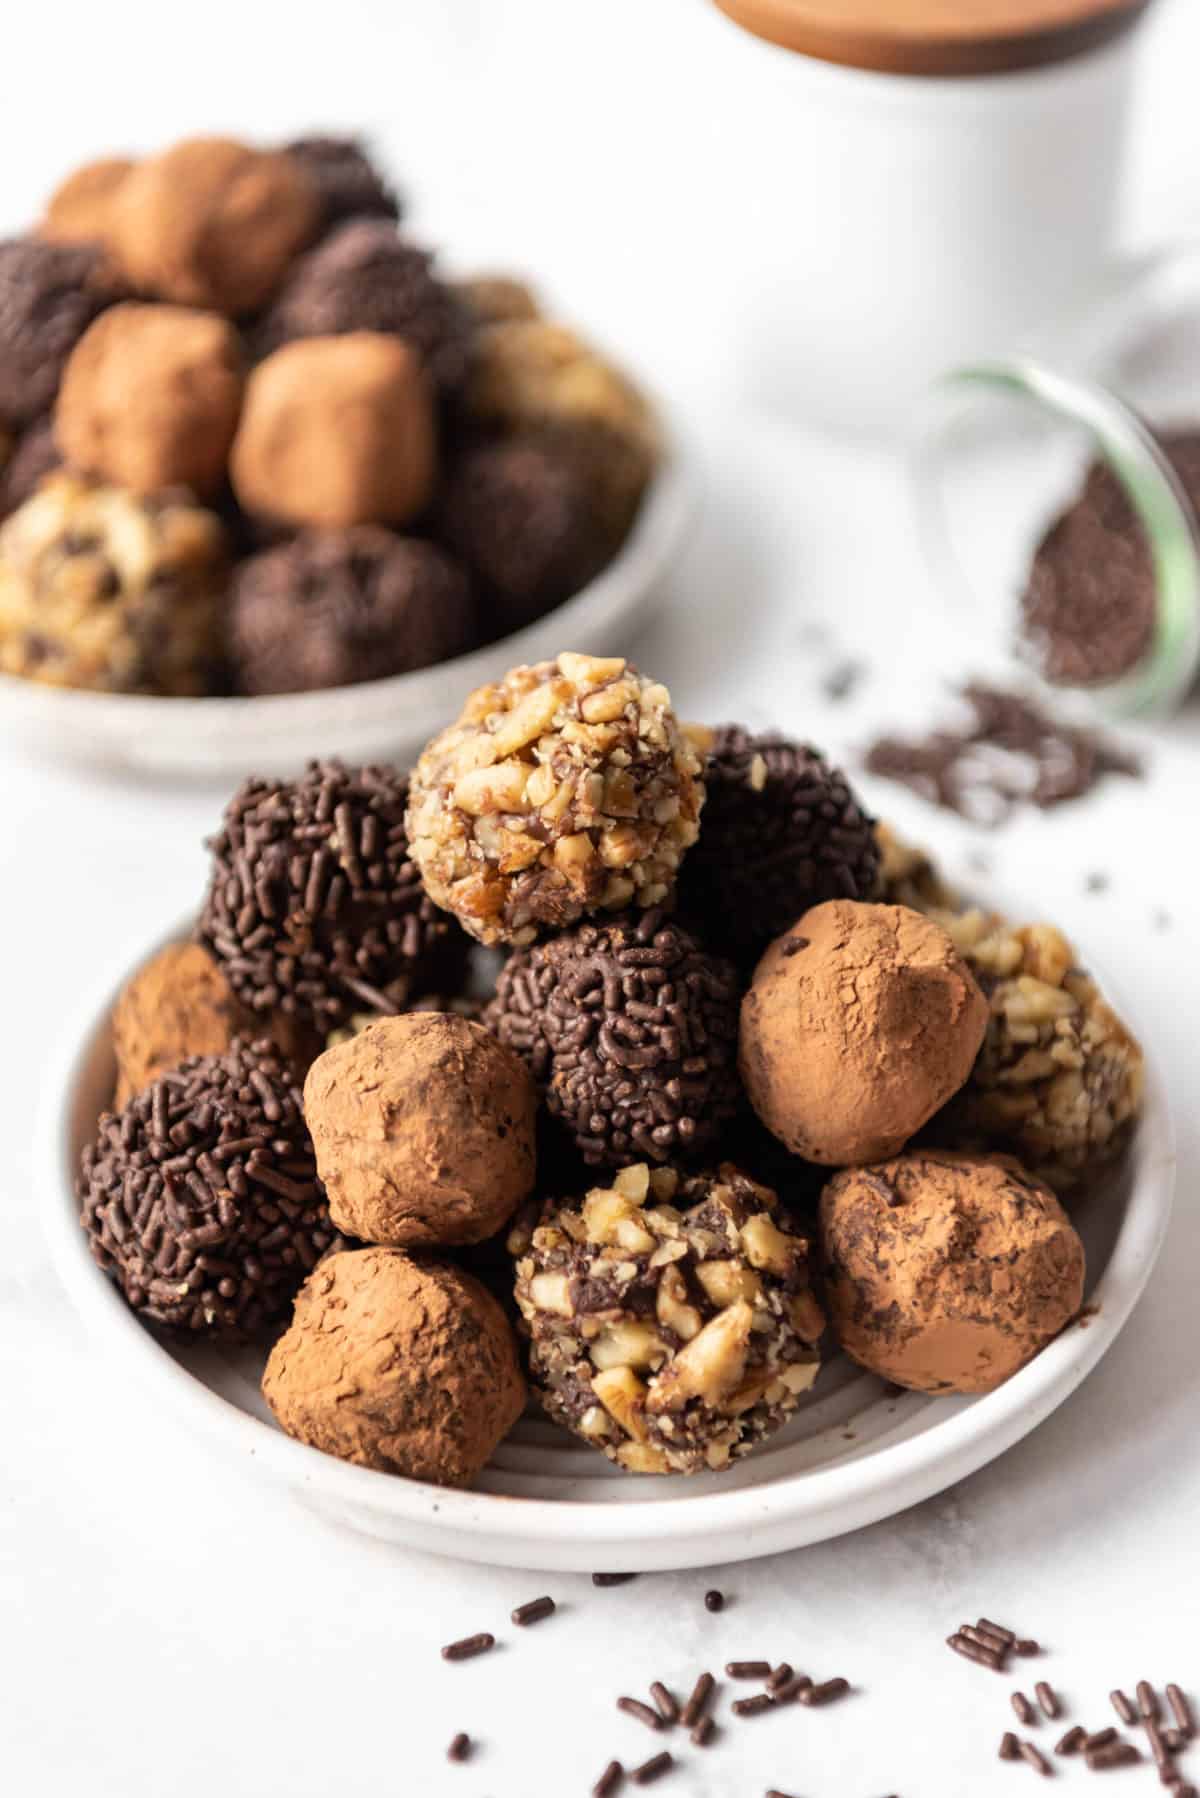 Chocolate truffles in various coatings piled on a plate.